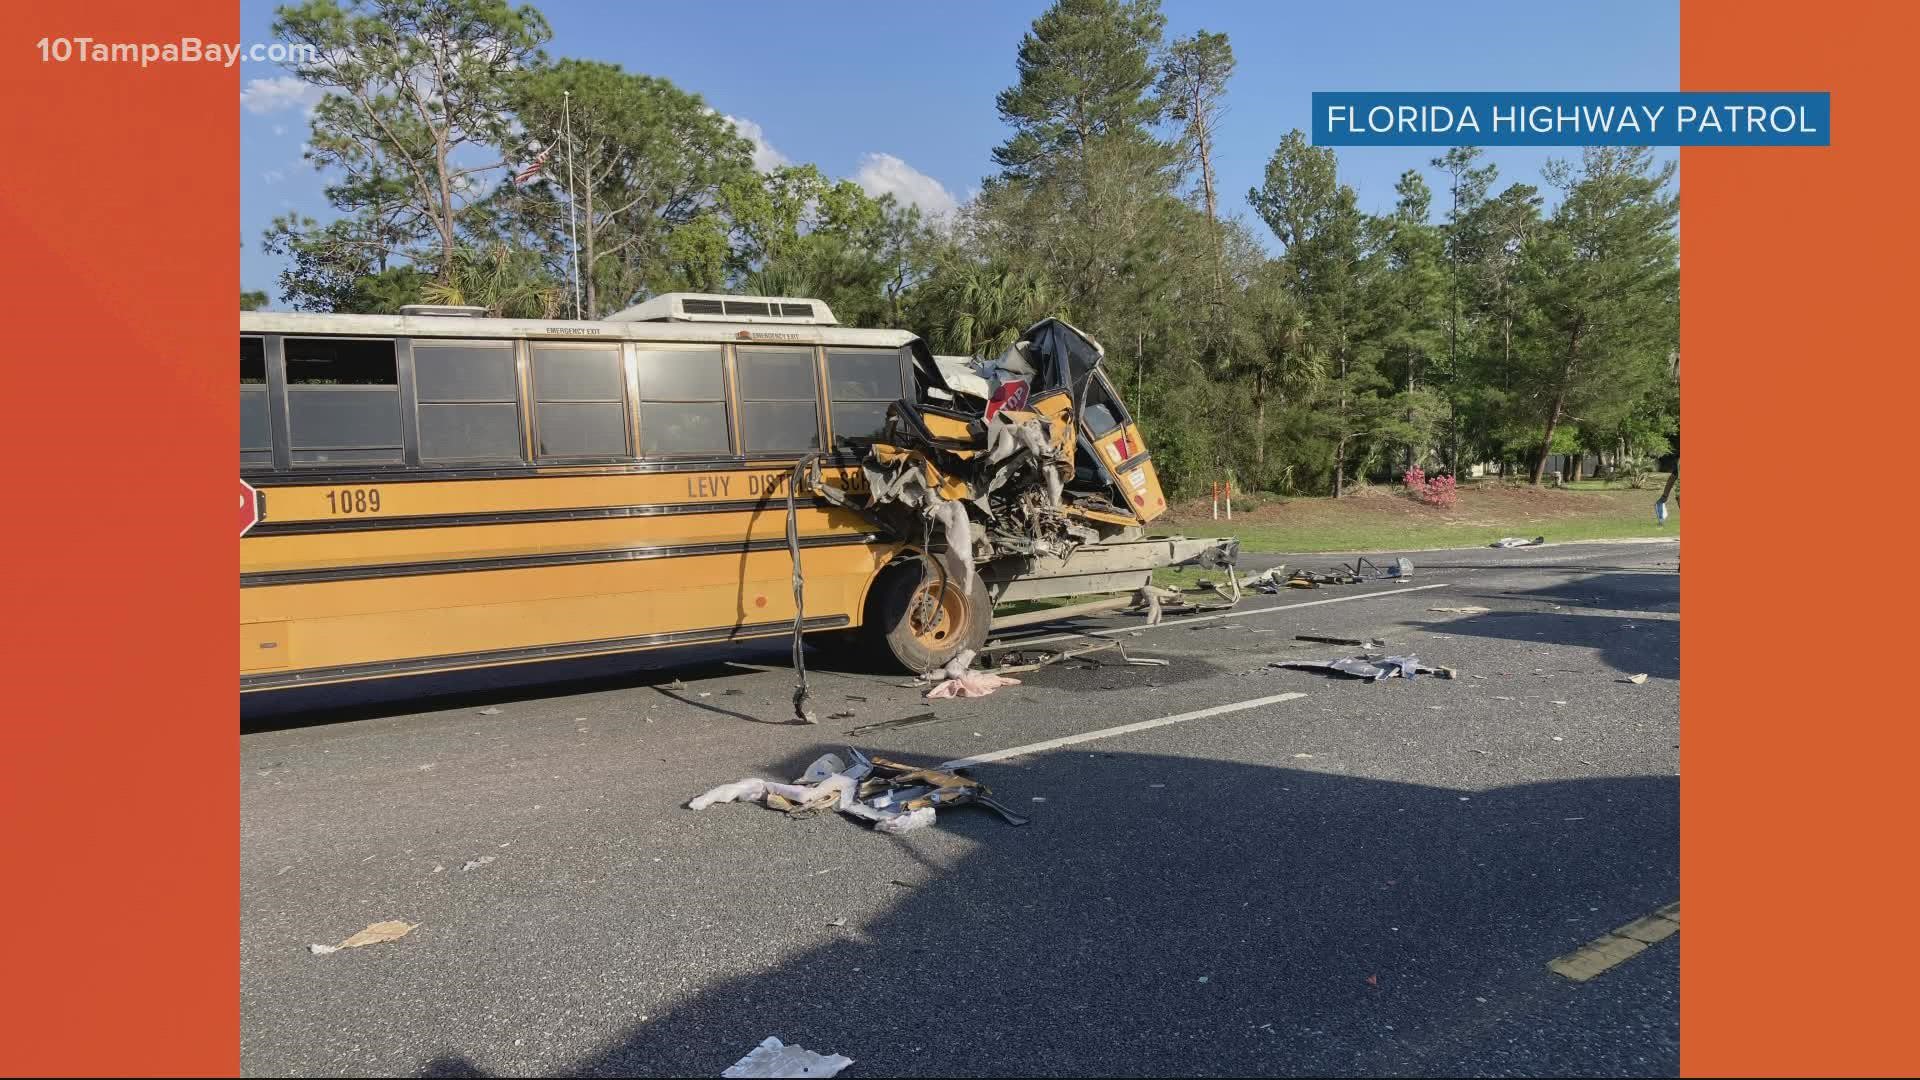 The FHP said 10 students were aboard the bus at the time of the crash.